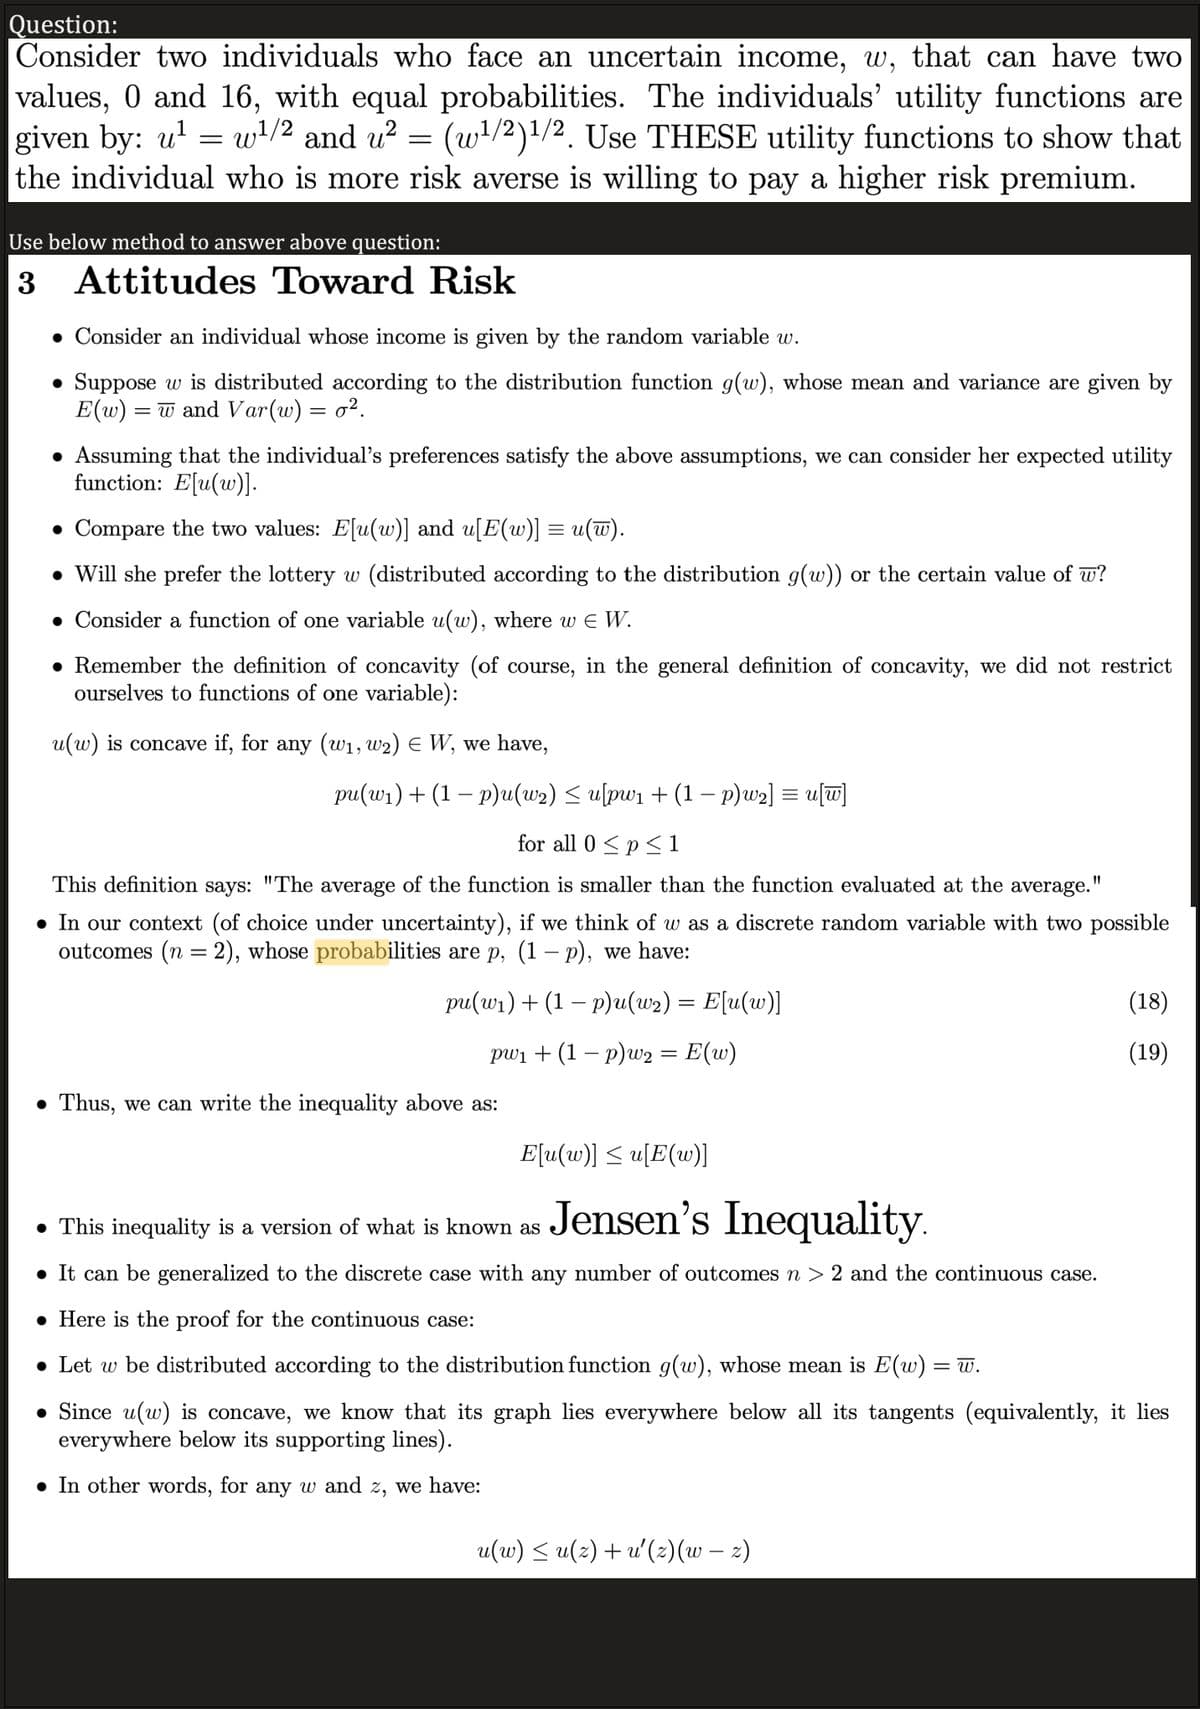 Question:
Consider two individuals who face an uncertain income, w, that can have two
values, 0 and 16, with equal probabilities. The individuals' utility functions are
given by: u¹=w¹/2 and u² = (w¹/2)1/2. Use THESE utility functions to show that
the individual who is more risk averse is willing to pay a higher risk premium.
Use below method to answer above question:
3 Attitudes Toward Risk
Consider an individual whose income is given by the random variable w.
Suppose w is distributed according to the distribution function g(w), whose mean and variance are given by
E(w) = w and Var(w) = o².
• Assuming that the individual's preferences satisfy the above assumptions, we can consider her expected utility
function: E[u(w)].
• Compare the two values: E[u(w)] and u[E(w)] = u(w).
• Will she prefer the lottery w (distributed according to the distribution g(w)) or the certain value of w?
● Consider a function of one variable u(w), where w € W.
• Remember the definition of concavity (of course, in the general definition of concavity, we did not restrict
ourselves to functions of one variable):
u(w) is concave if, for any (w₁, W2) E W, we have,
pu(w₁) + (1 − p)u(w₂) ≤ u[pw₁ + (1 − p)w₂] = u[w]
for all 0 < p ≤1
This definition says: "The average of the function is smaller than the function evaluated at the average.
● In our context (of choice under uncertainty), if we think of w as a discrete random variable with two possible
outcomes (n = 2), whose probabilities are p, (1 − p), we have:
pu(w₁) + (1 − p)u(w₂) = E[u(w)]
pw₁ + (1 − p)w2 = E(w)
● Thus, we can write the inequality above as:
E[u(w)] ≤ u[E(w)]
Jensen's Inequality.
• This inequality is a version of what is known as
● It can be generalized to the discrete case with any number of outcomes n > 2 and the continuous case.
(18)
(19)
• Here is the proof for the continuous case:
• Let w be distributed according to the distribution function g(w), whose mean is E(w) = w.
Since u(w) is concave, we know that its graph lies everywhere below all its tangents (equivalently, it lies
everywhere below its supporting lines).
● In other words, for any w and z, we have:
u(w) ≤ u(z) + u'(z)(w – z)